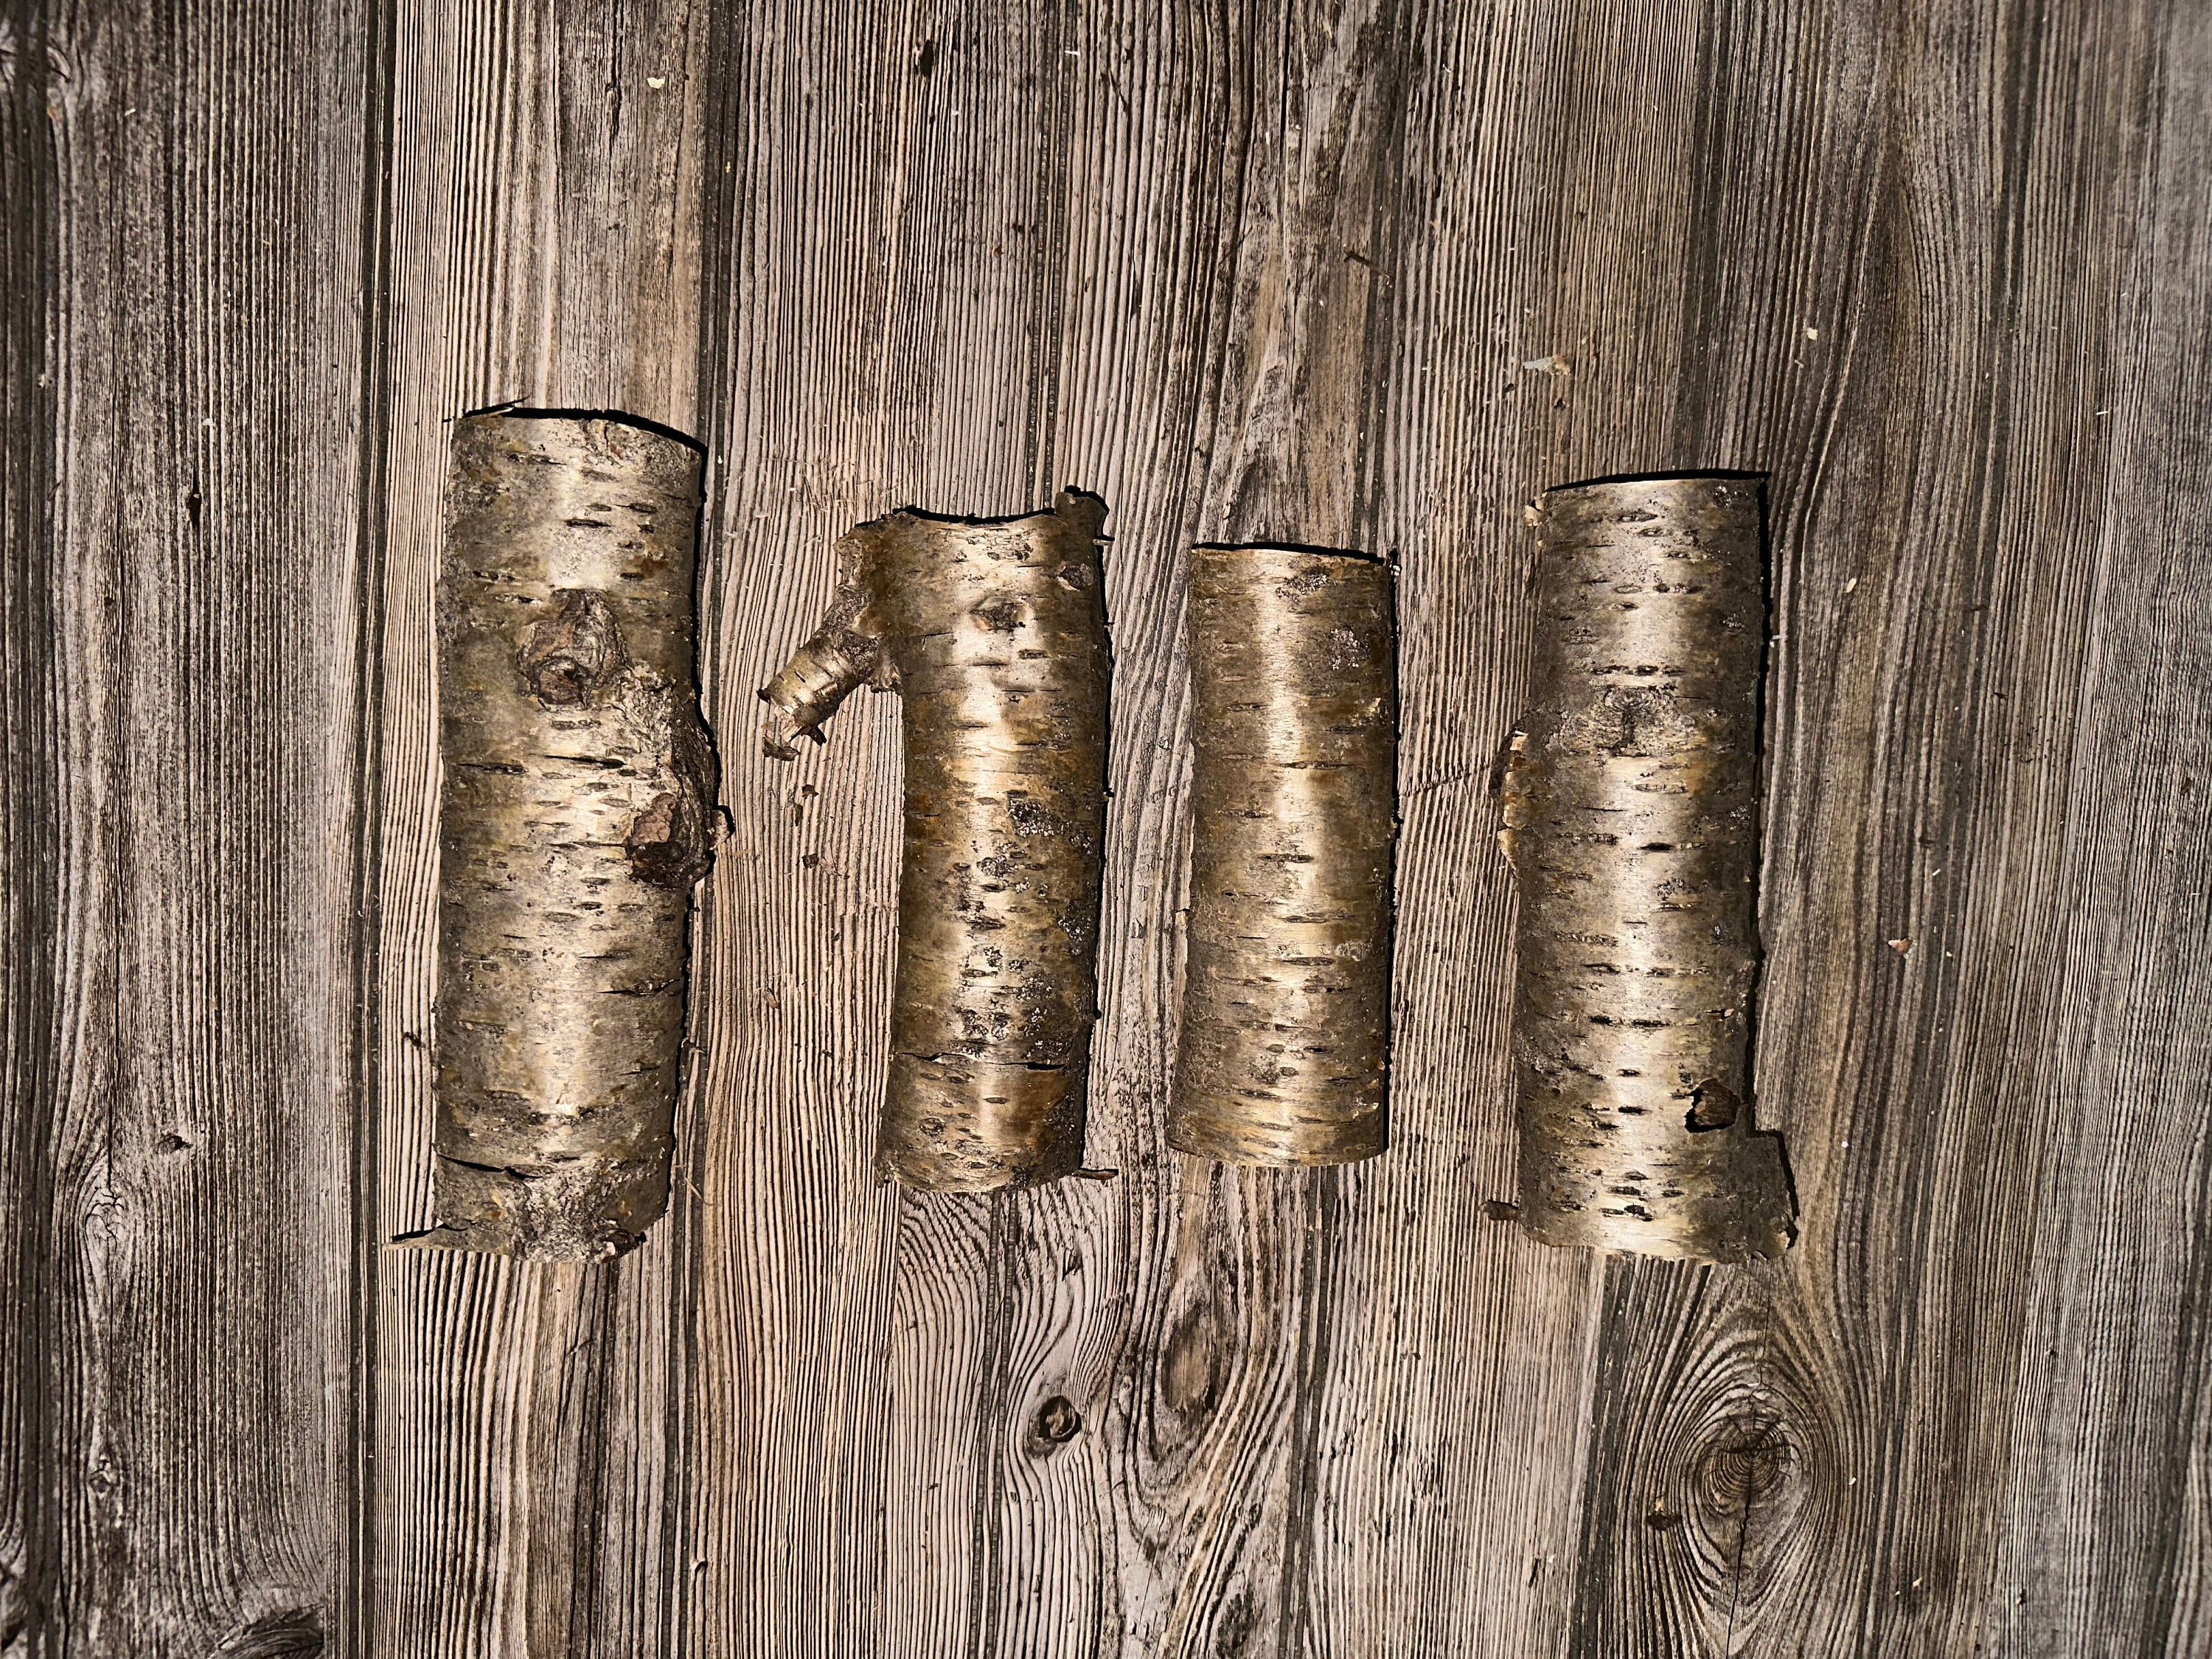 Yellow Birch Bark Tubes, 4 Golden Brown Tubes, Approx 7-9 Inches Long by 2-3 Inches Wide